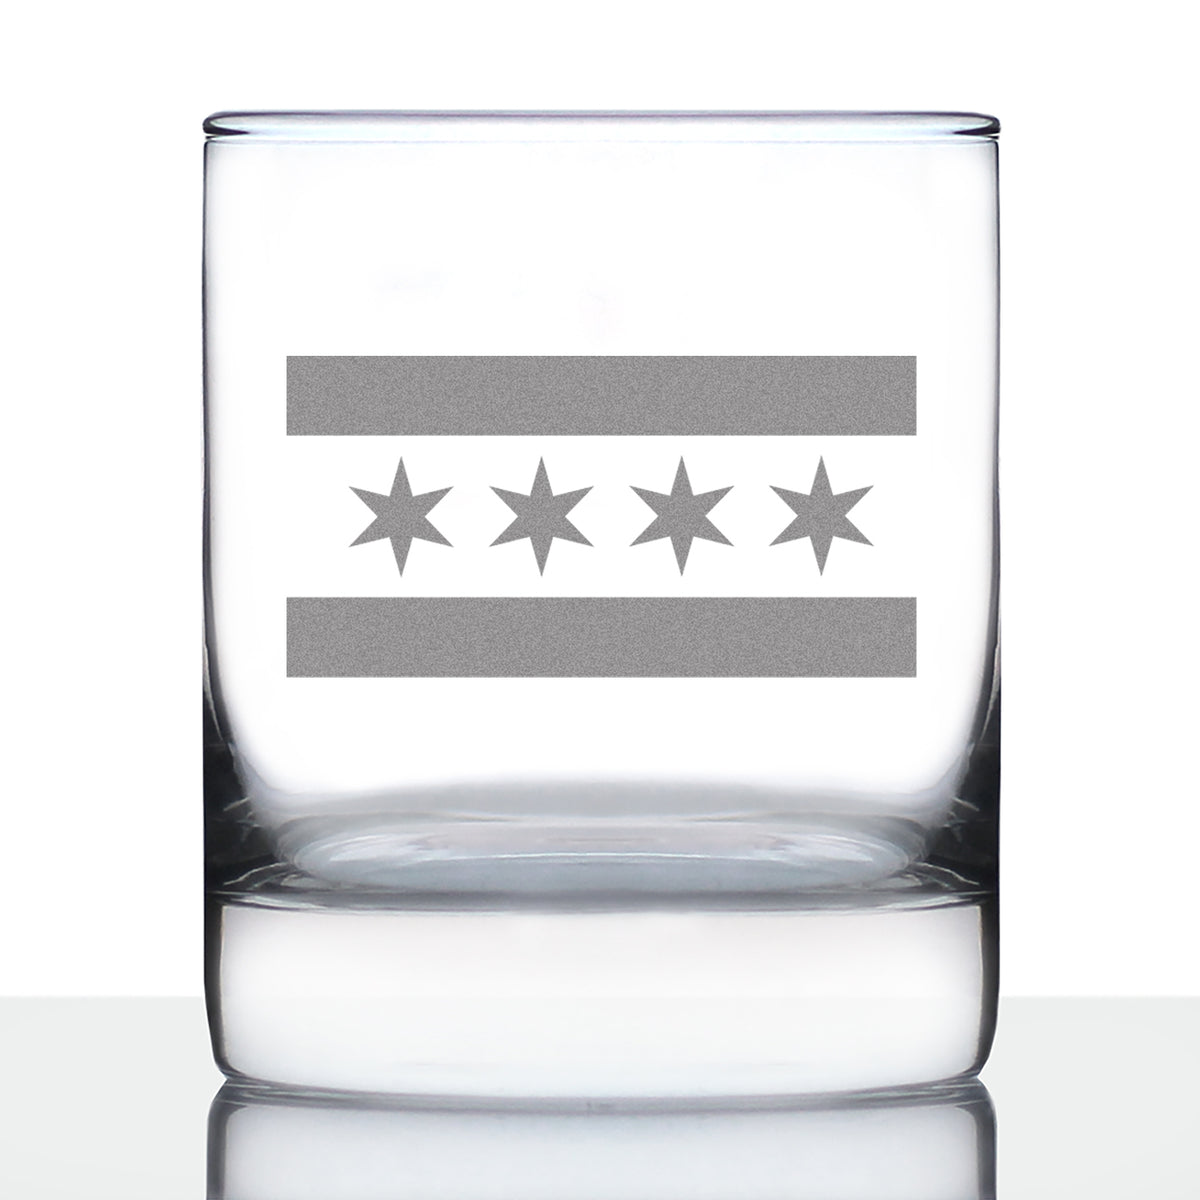 Chicago Flag - Whiskey Rocks Glass - Fun Unique Glass Gift for Chitown Lovers - Cute Chicago Themed Decor - 10.25 Oz